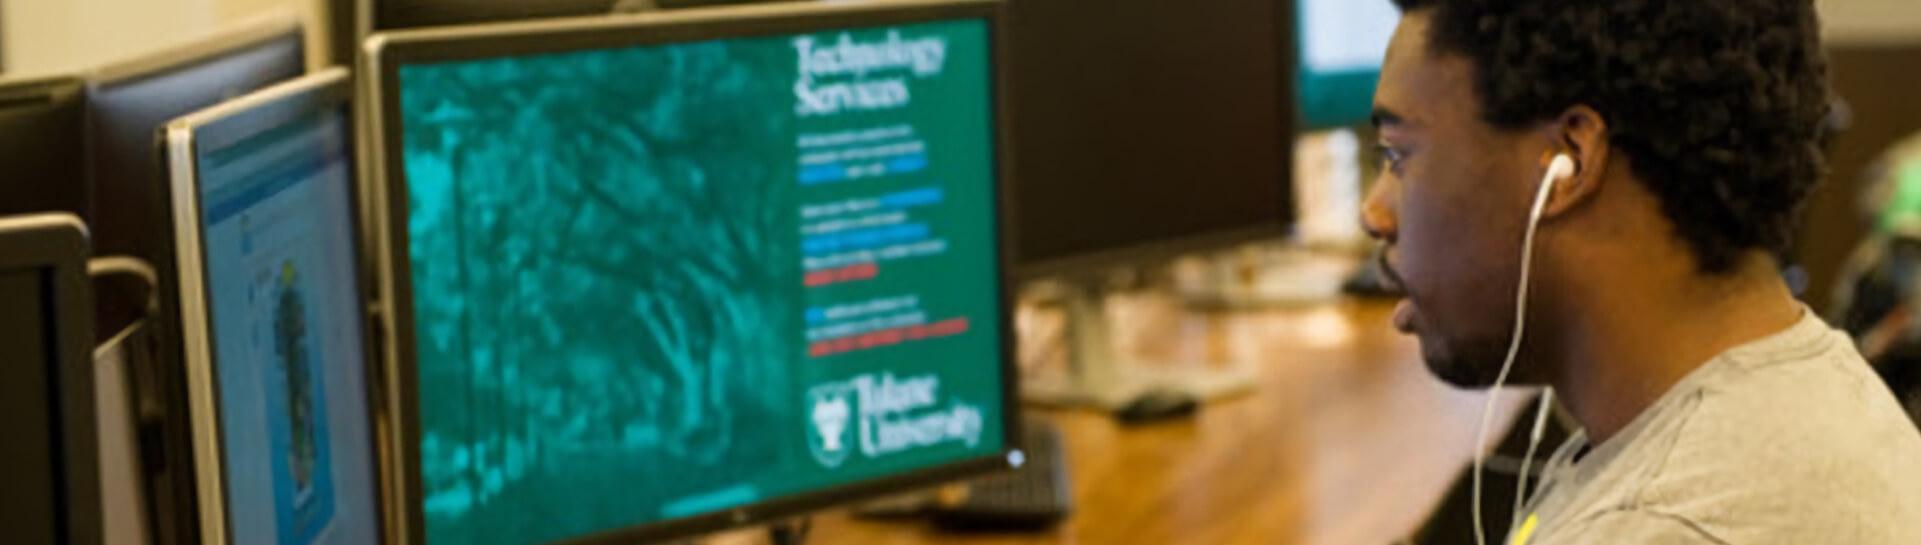 A student working on a computer representing Tulane School of Professional Advancement's information technology degree program in New Orleans, LA